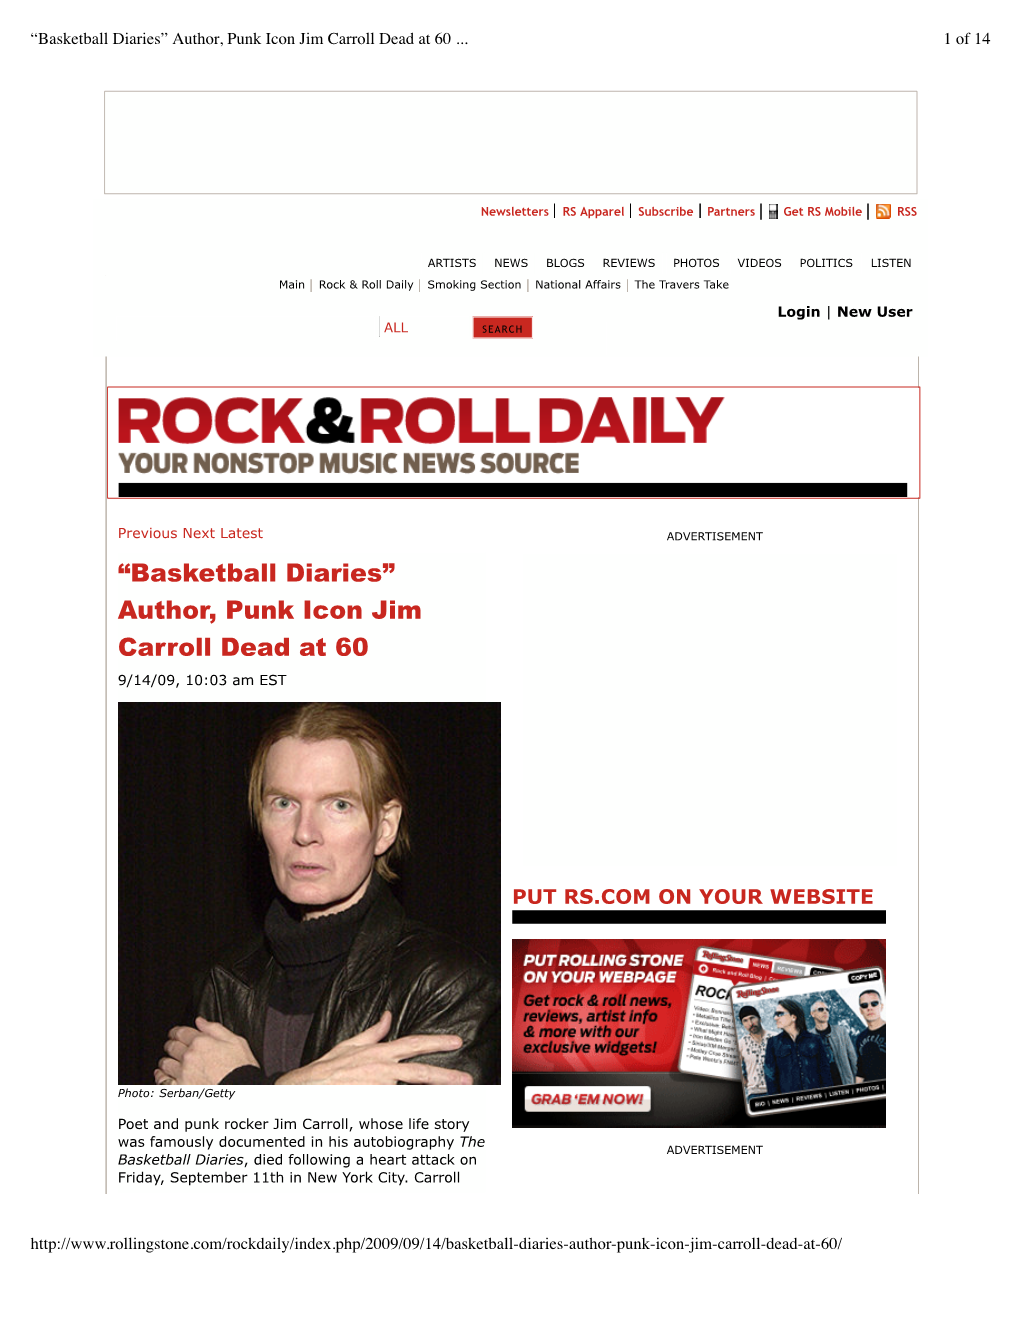 Author, Punk Icon Jim Carroll Dead at 60 Rolling Stone